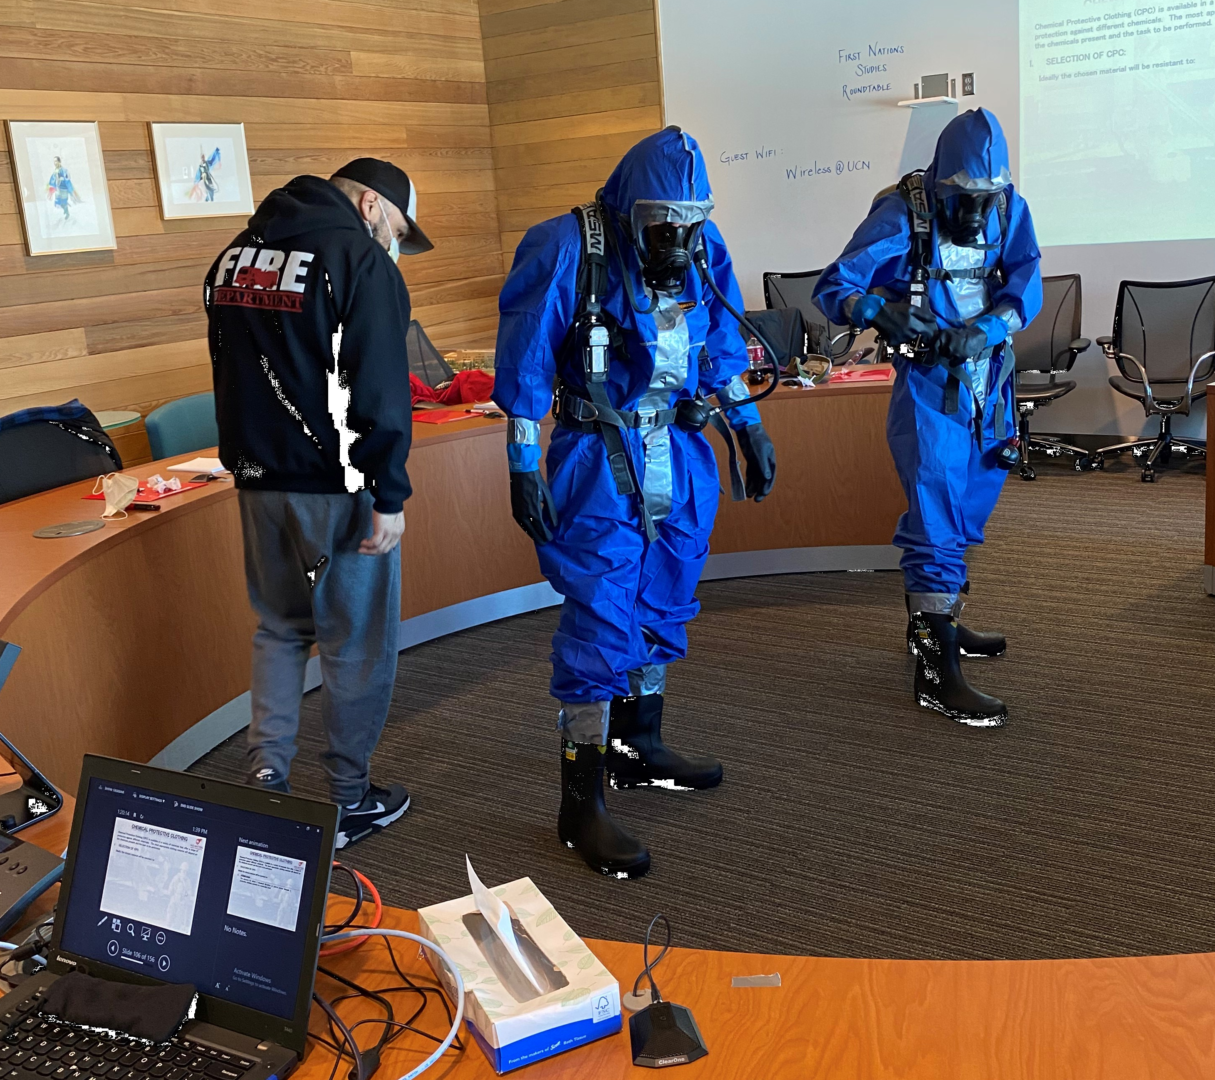 2 people training in safety gear